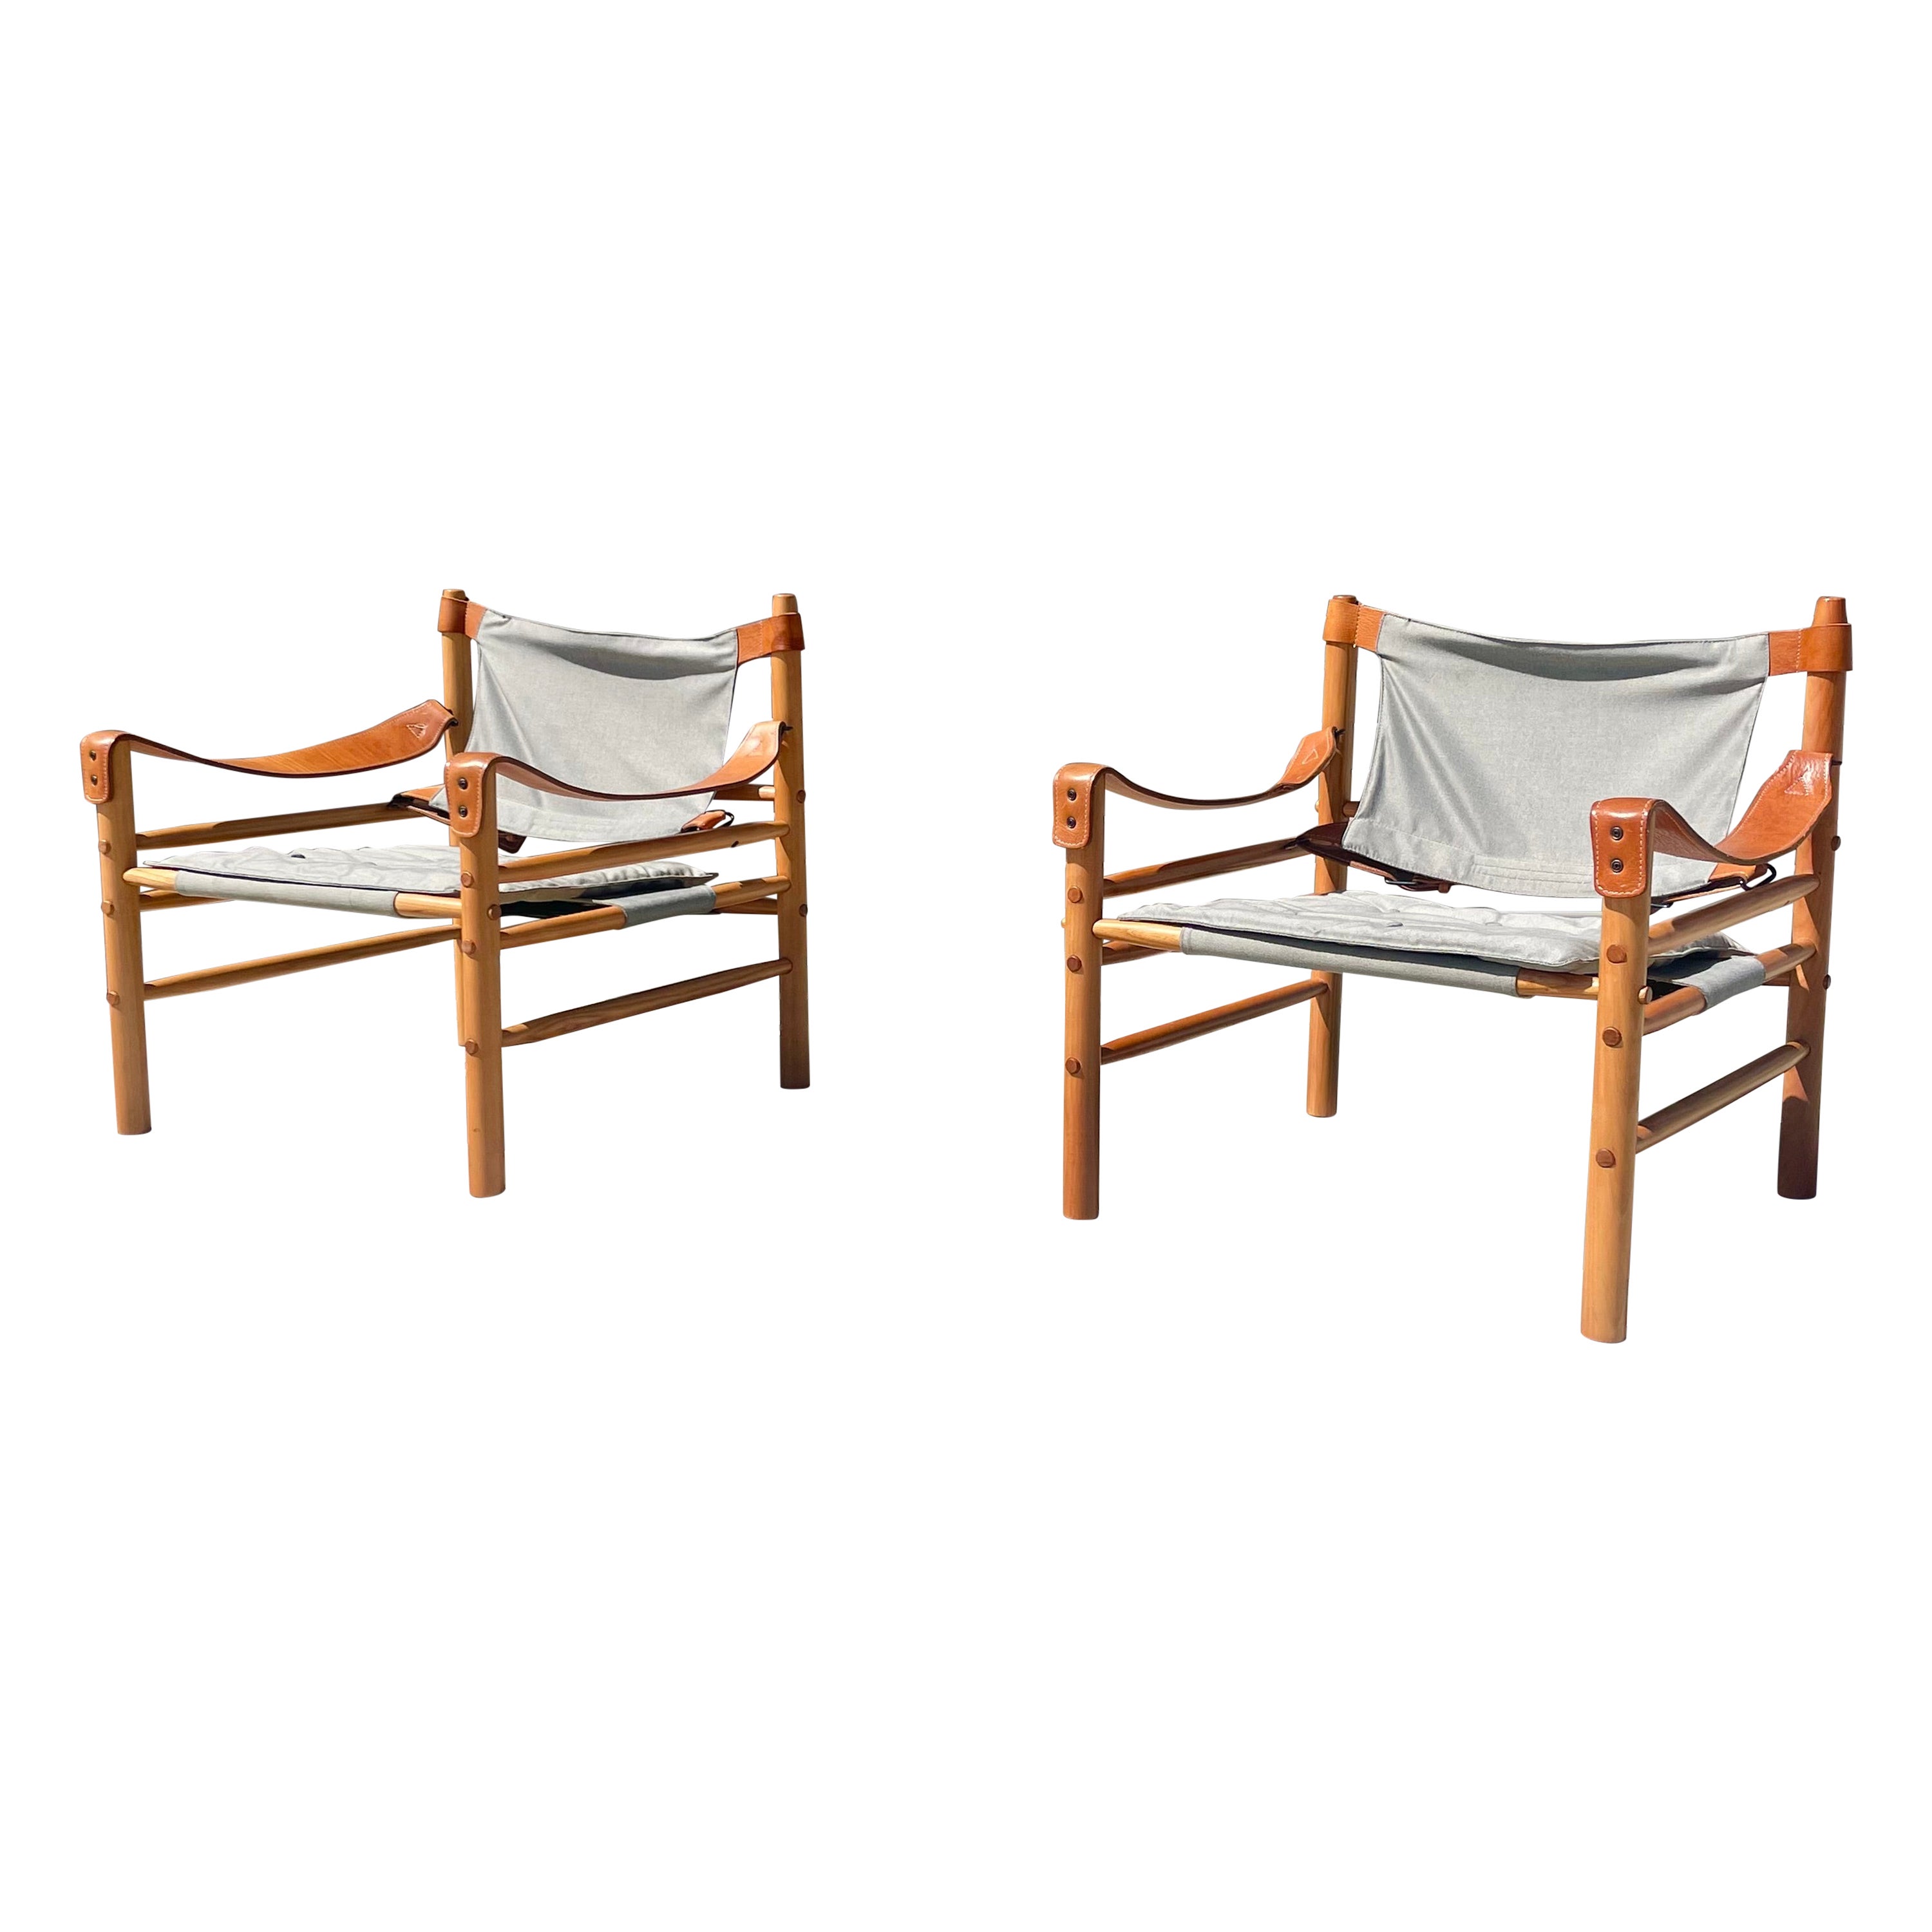 Midcentury Sirocco Safari Chairs Styled After Arne Norell